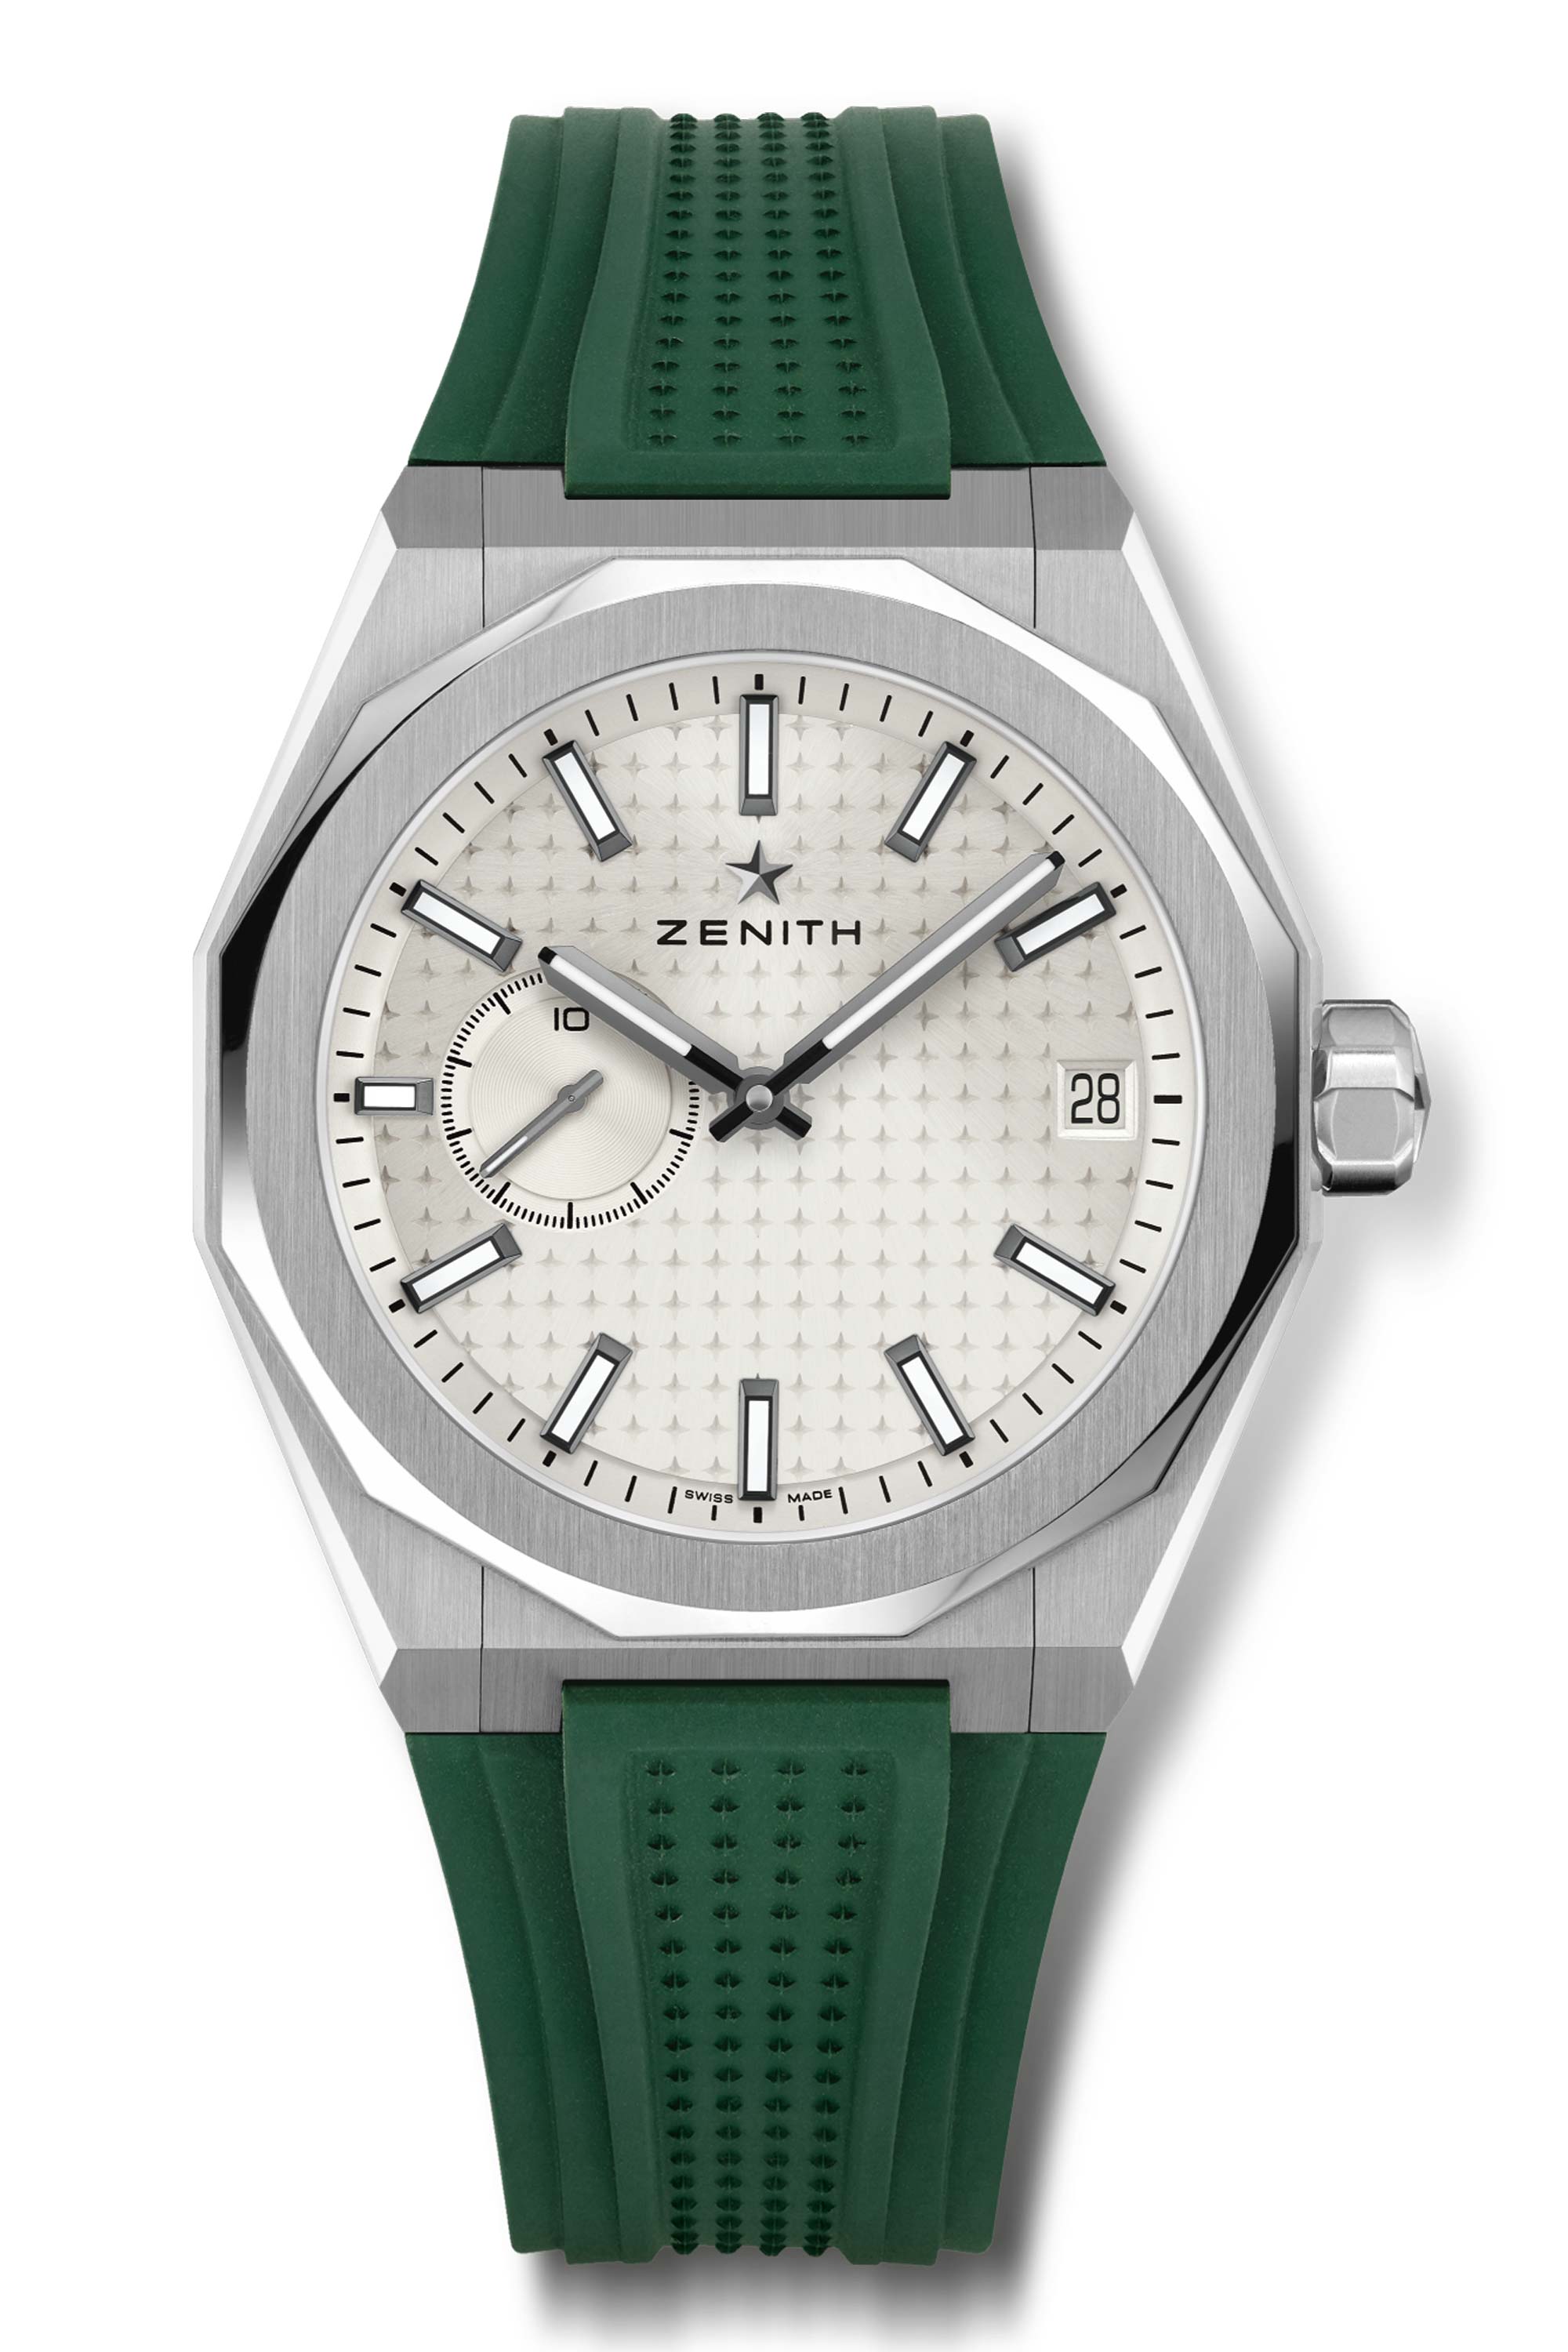 With The DEFY Skyline Ceramic And Revival Shadow, Zenith Has